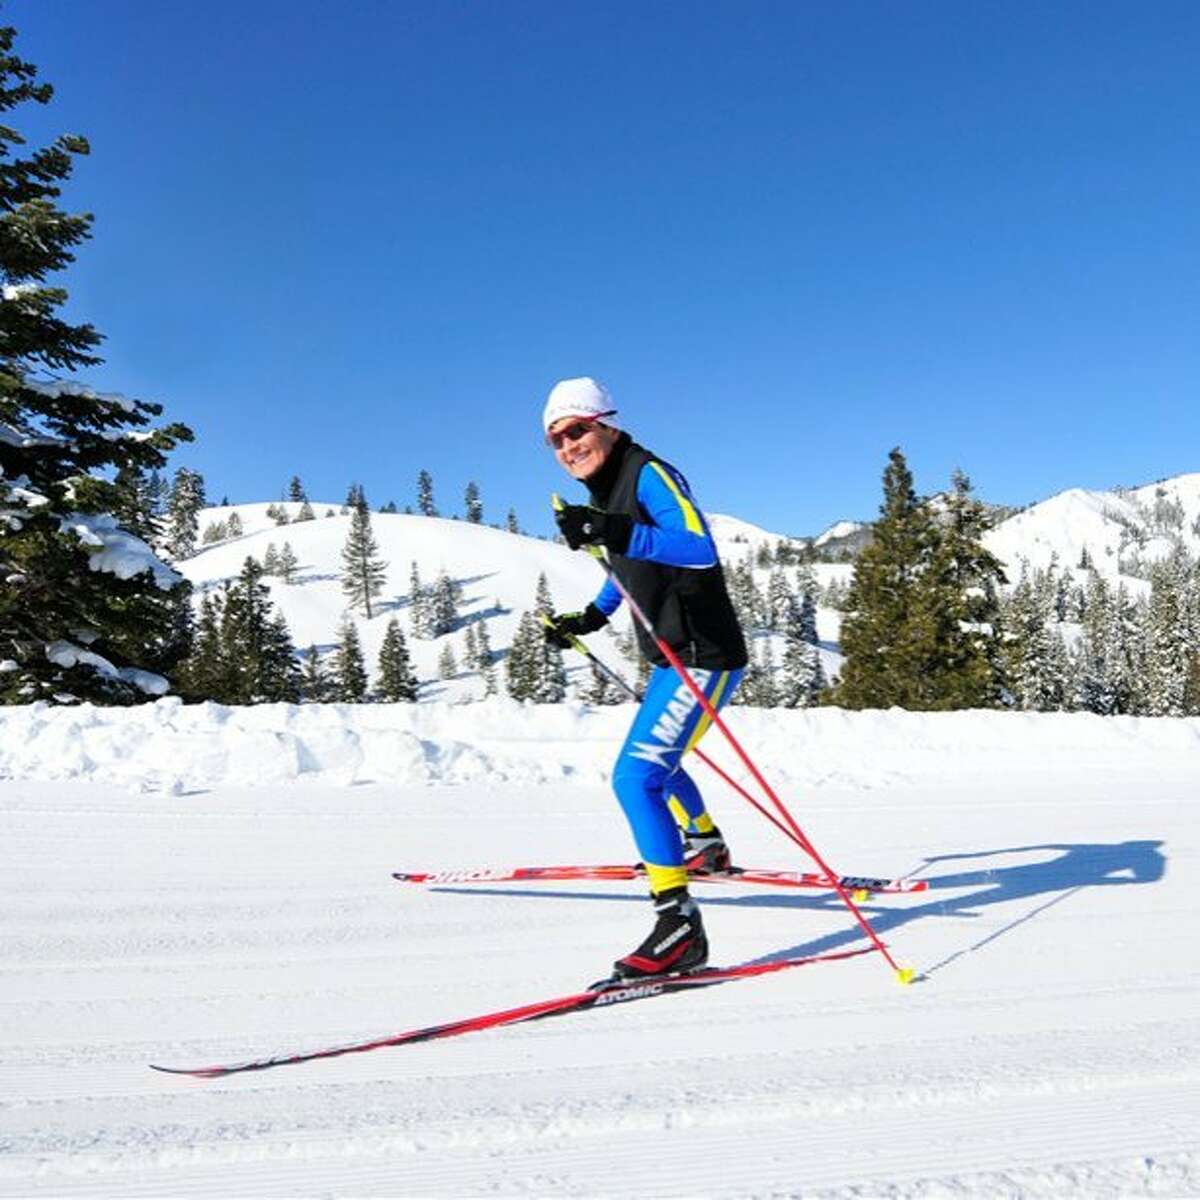 Tahoe Donner has two weeks of special discounted packages for beginners during January, designated National Learn to Ski and Board month.